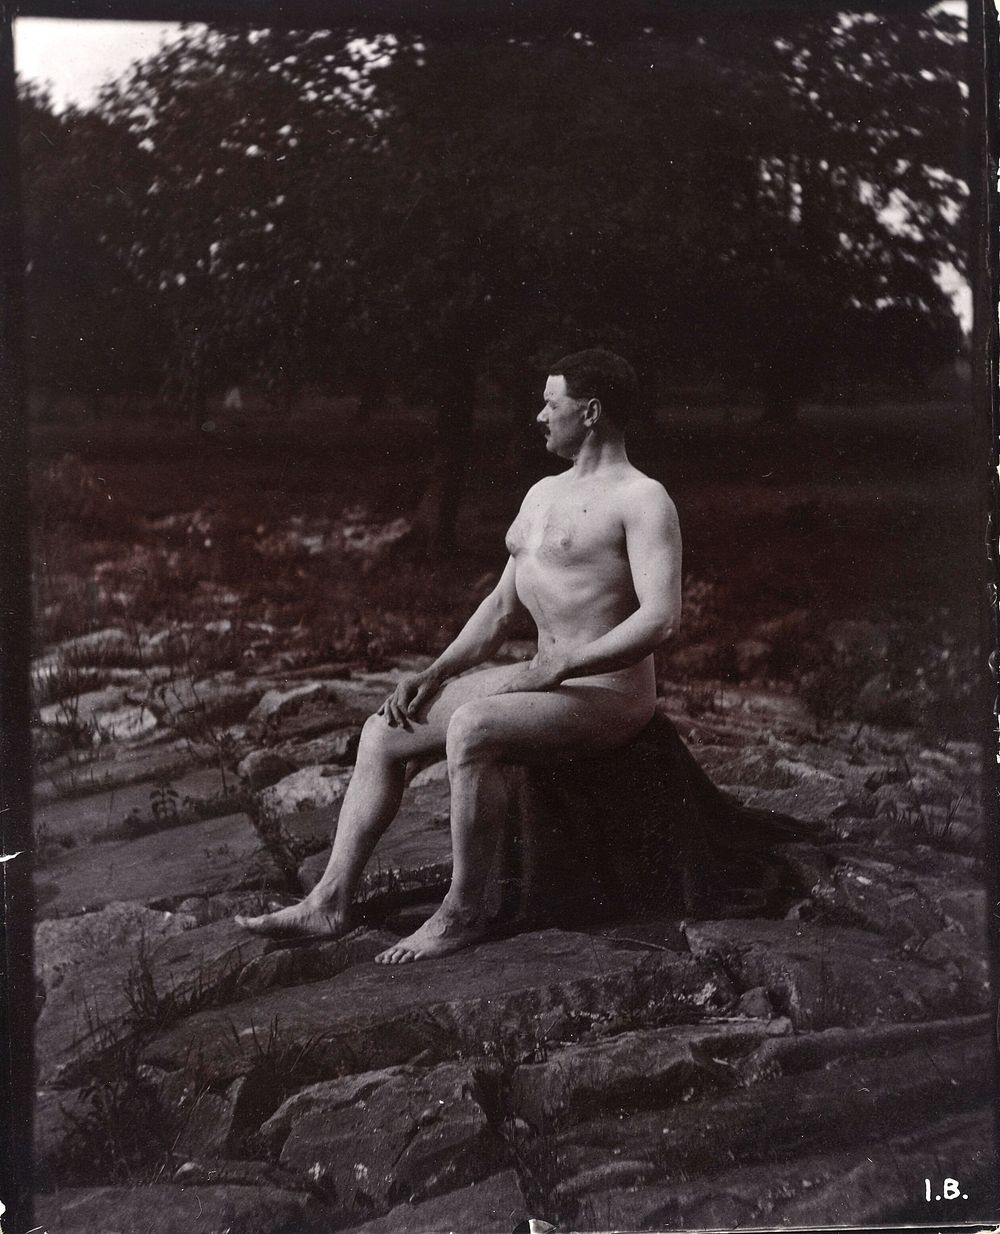 A man posing naked, seated on a rocky outcrop in a leafy landscape.